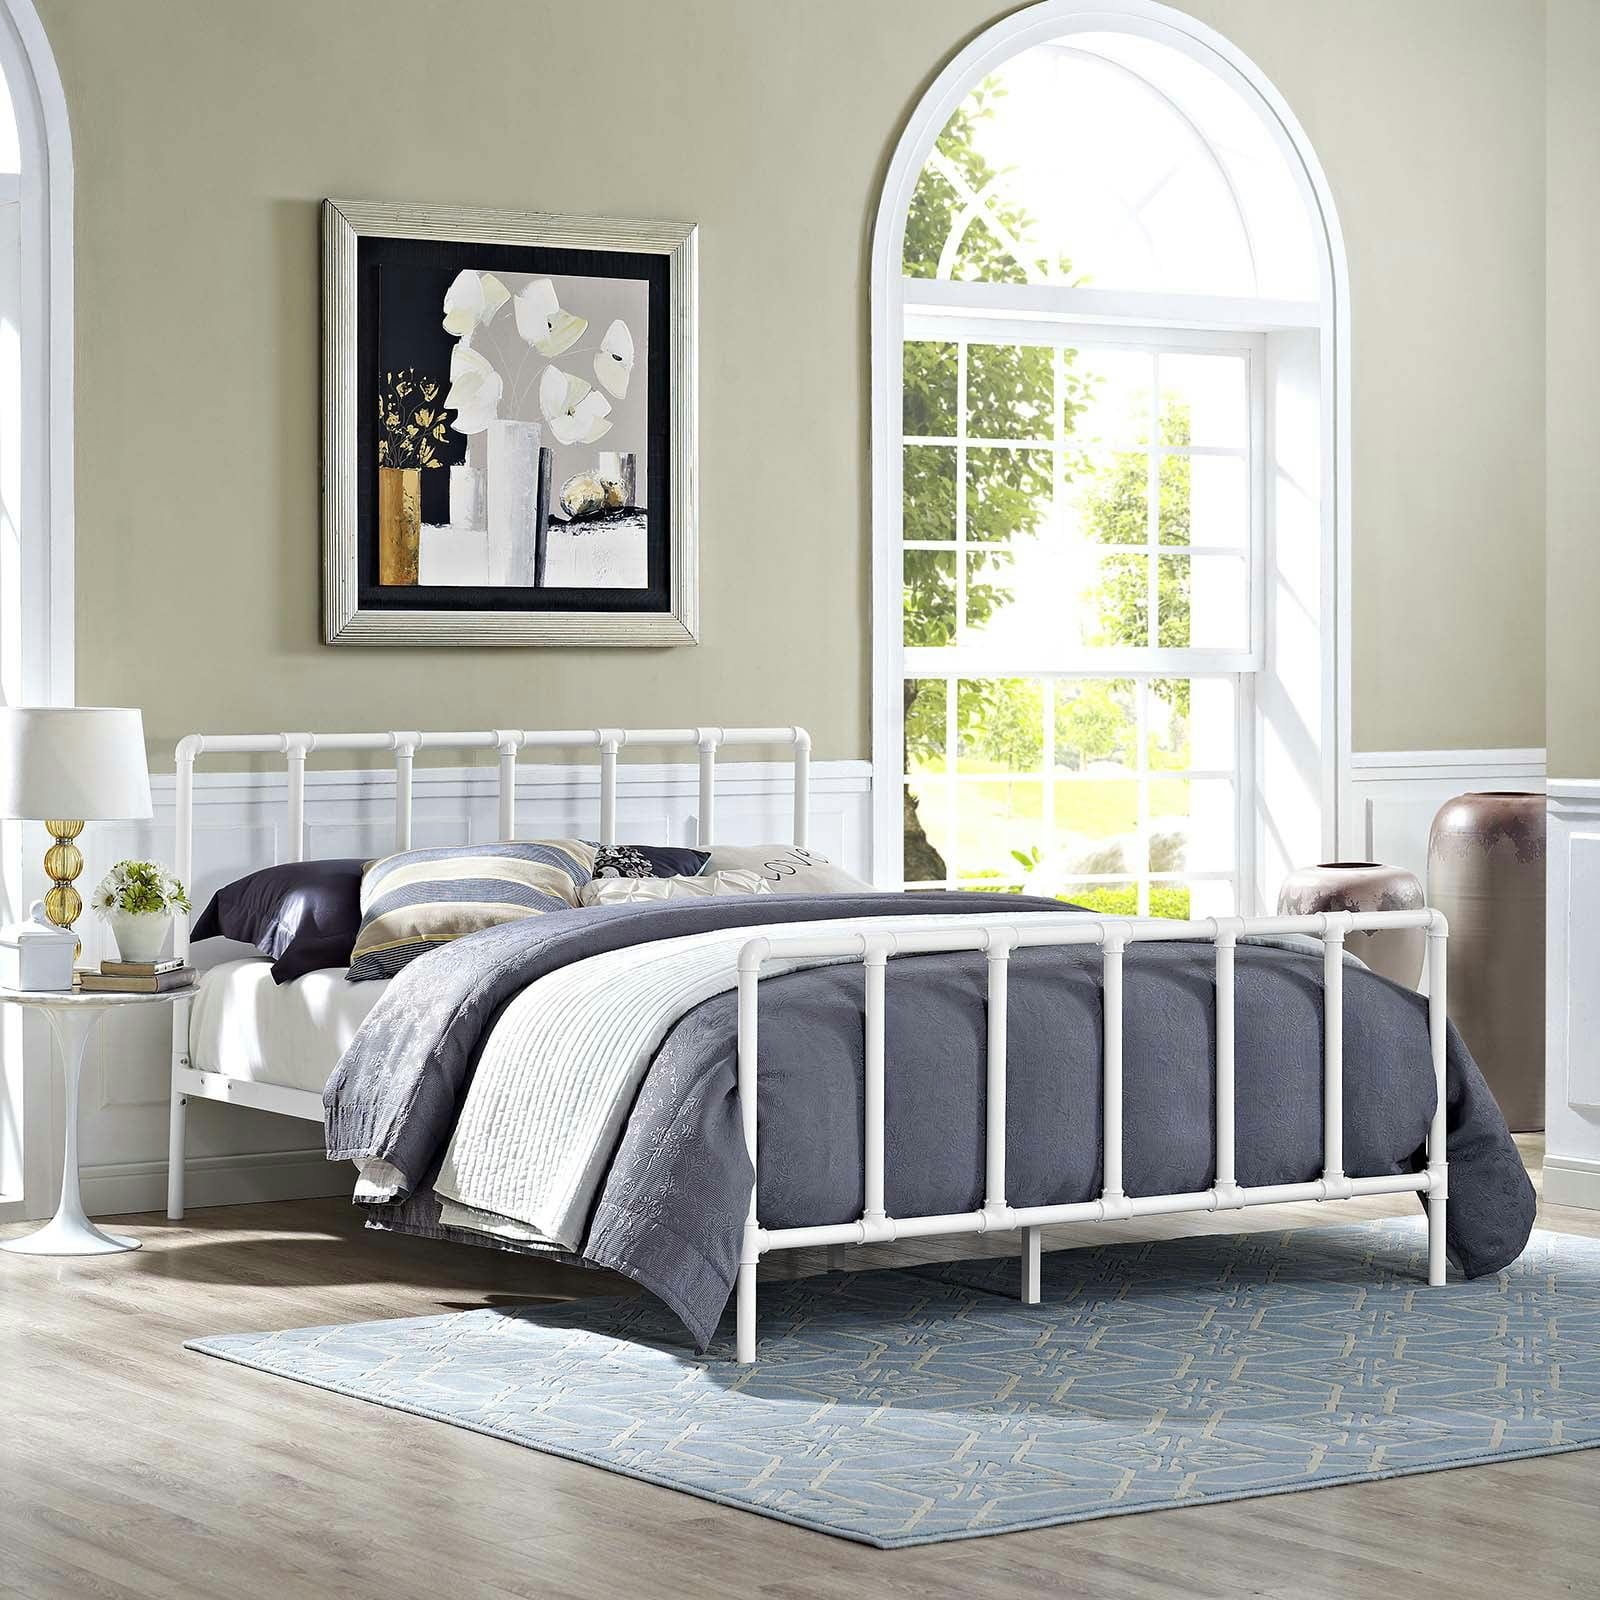 Serene Cottage Queen Metal Bed Frame with Headboard in White